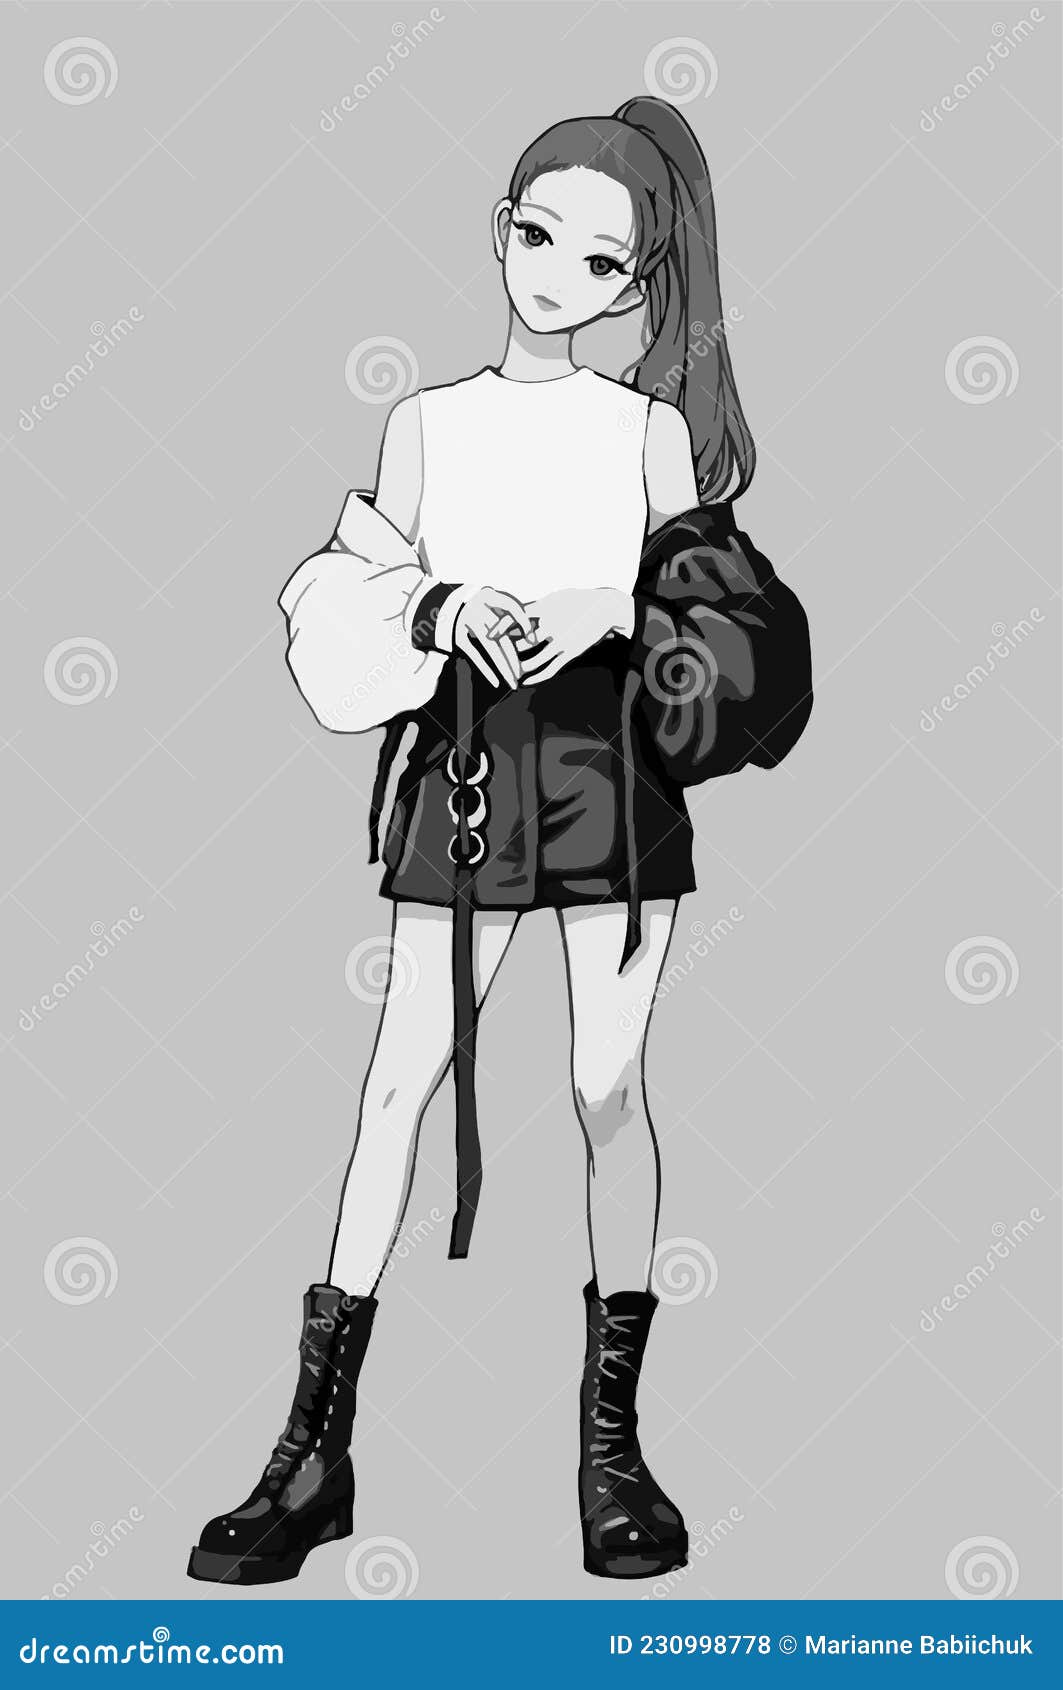 Japanese Anime Hairstyle PNG Transparent Japanese Anime Female Ponytail  Character Hairstyle Japan Female Character PNG Image For Free Download